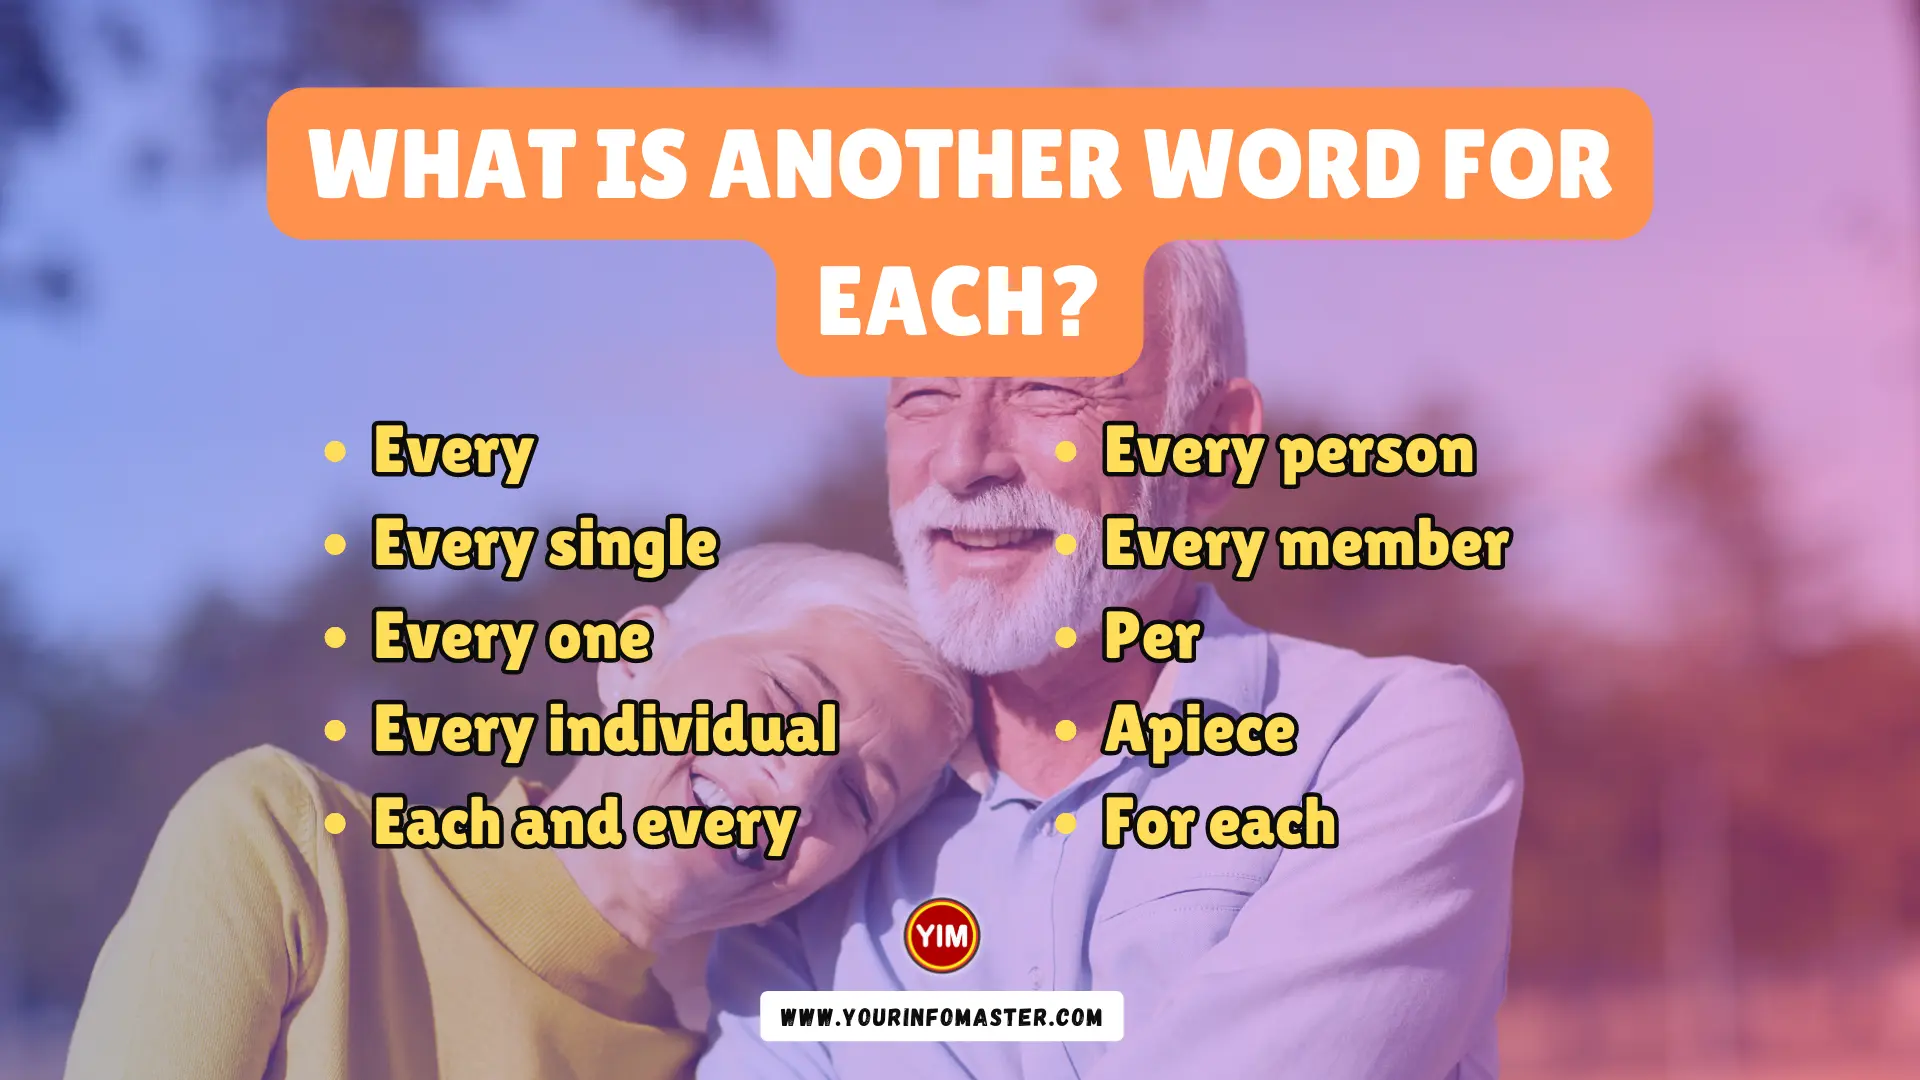 What is another word for Each